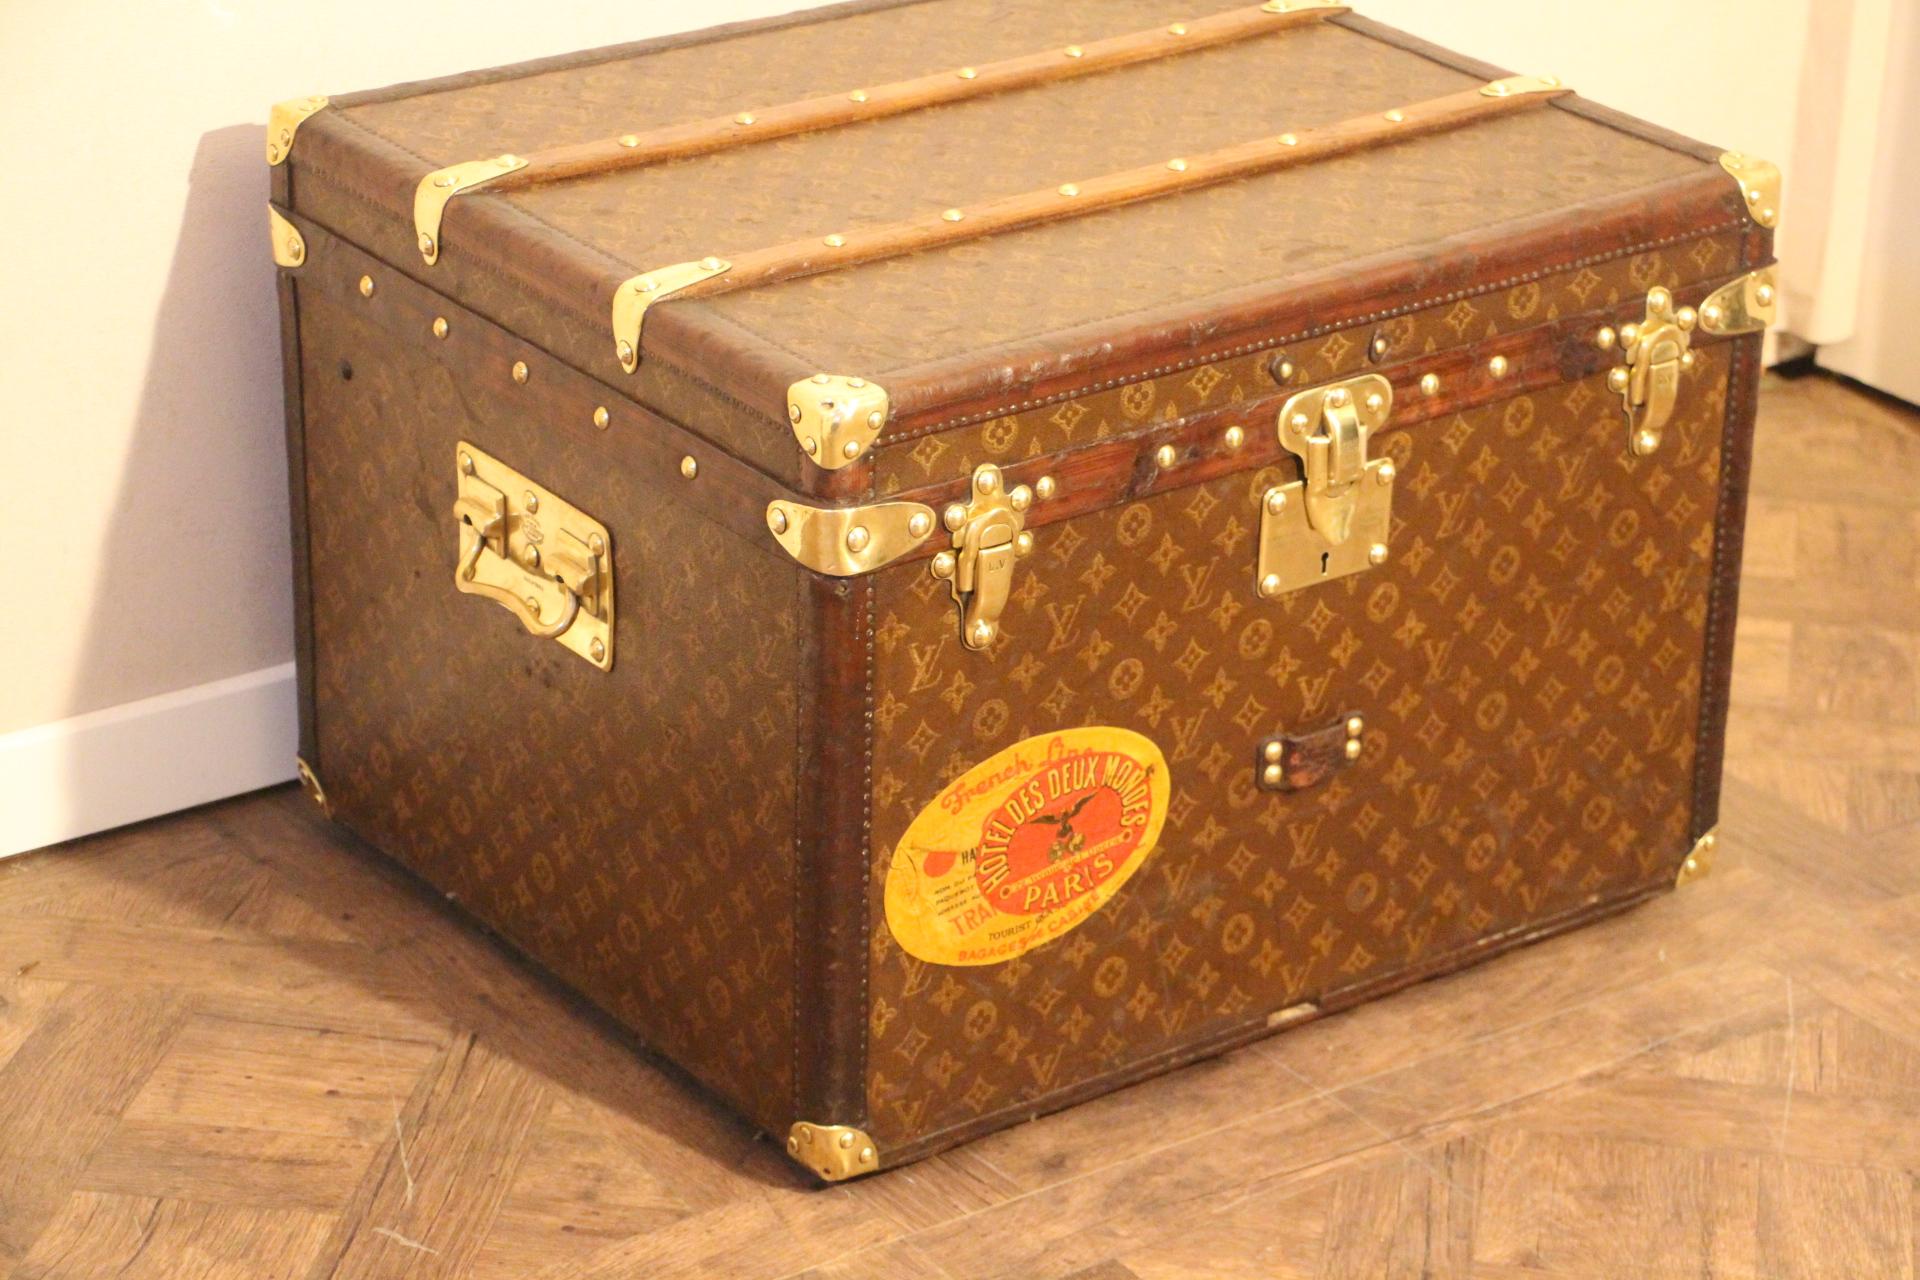 This lovely little Louis Vuitton steamer trunk features stenciled monogram, leather trim, solid brass corners, locks, and side handles. Its brass locks, studs and side handles are all marked Louis Vuitton.
It has got a very warm patina. It has got